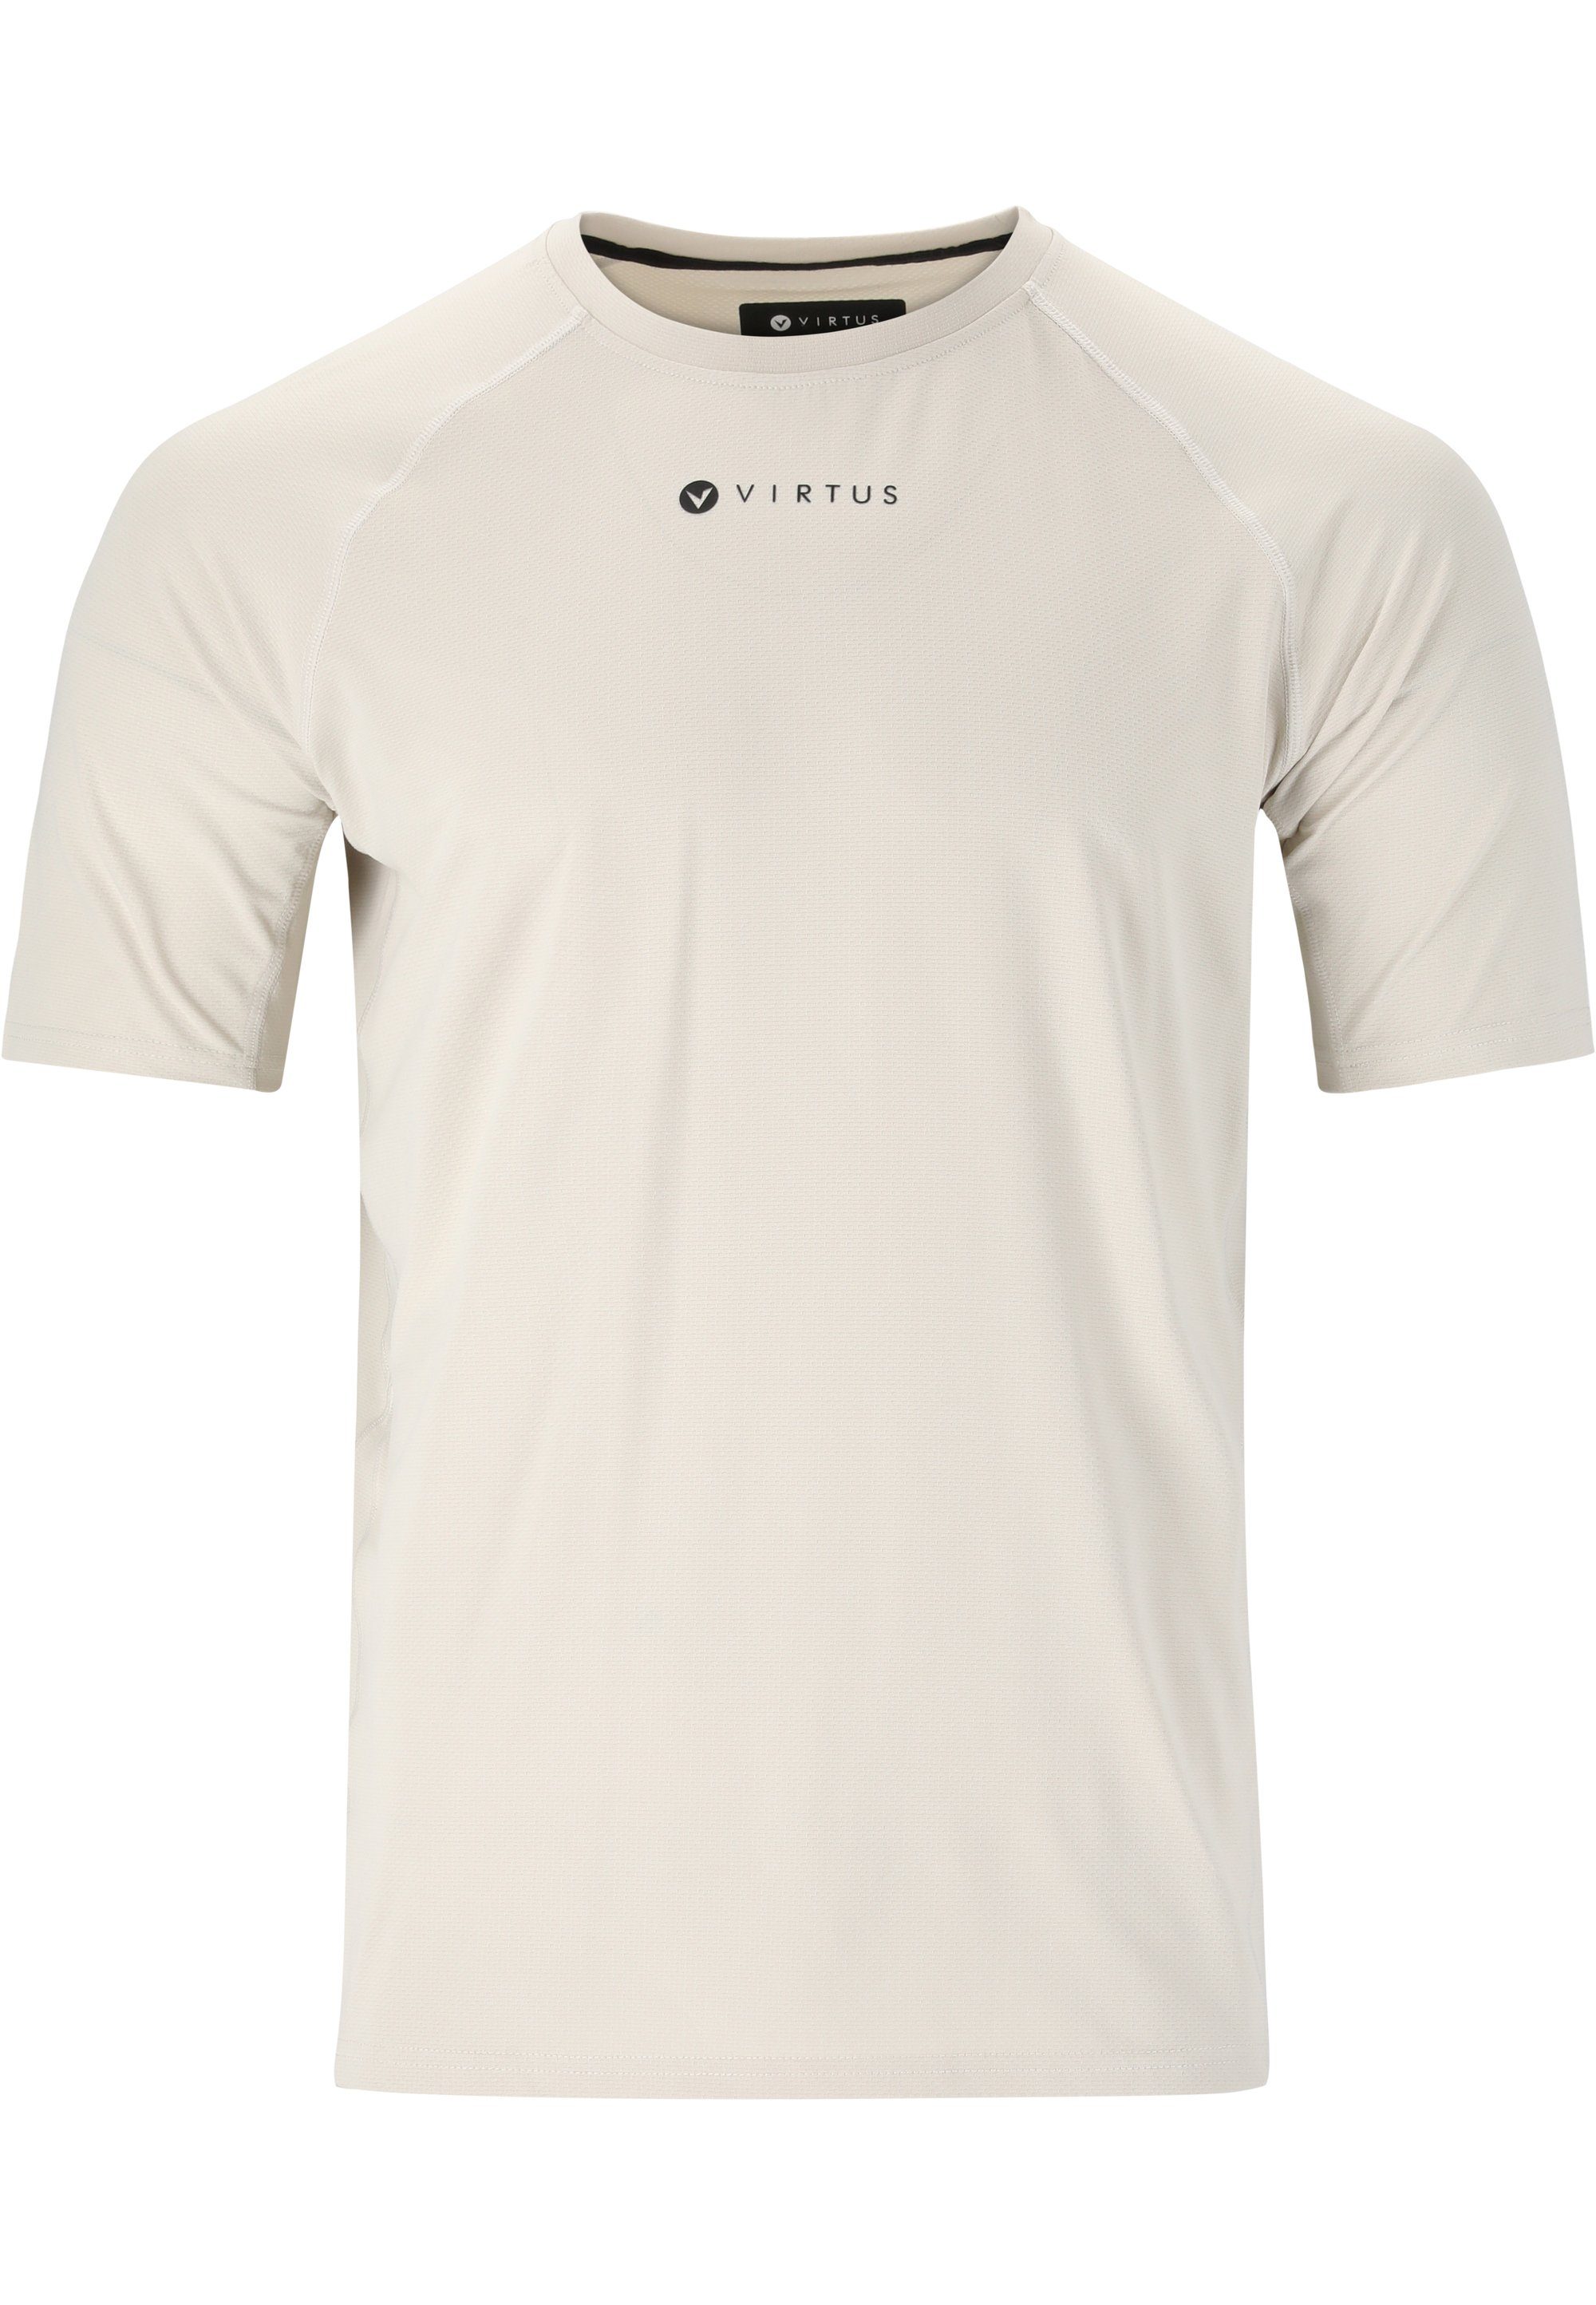 Virtus Muskelshirt Toscan (1-tlg) Silver+-Technologie offwhite mit